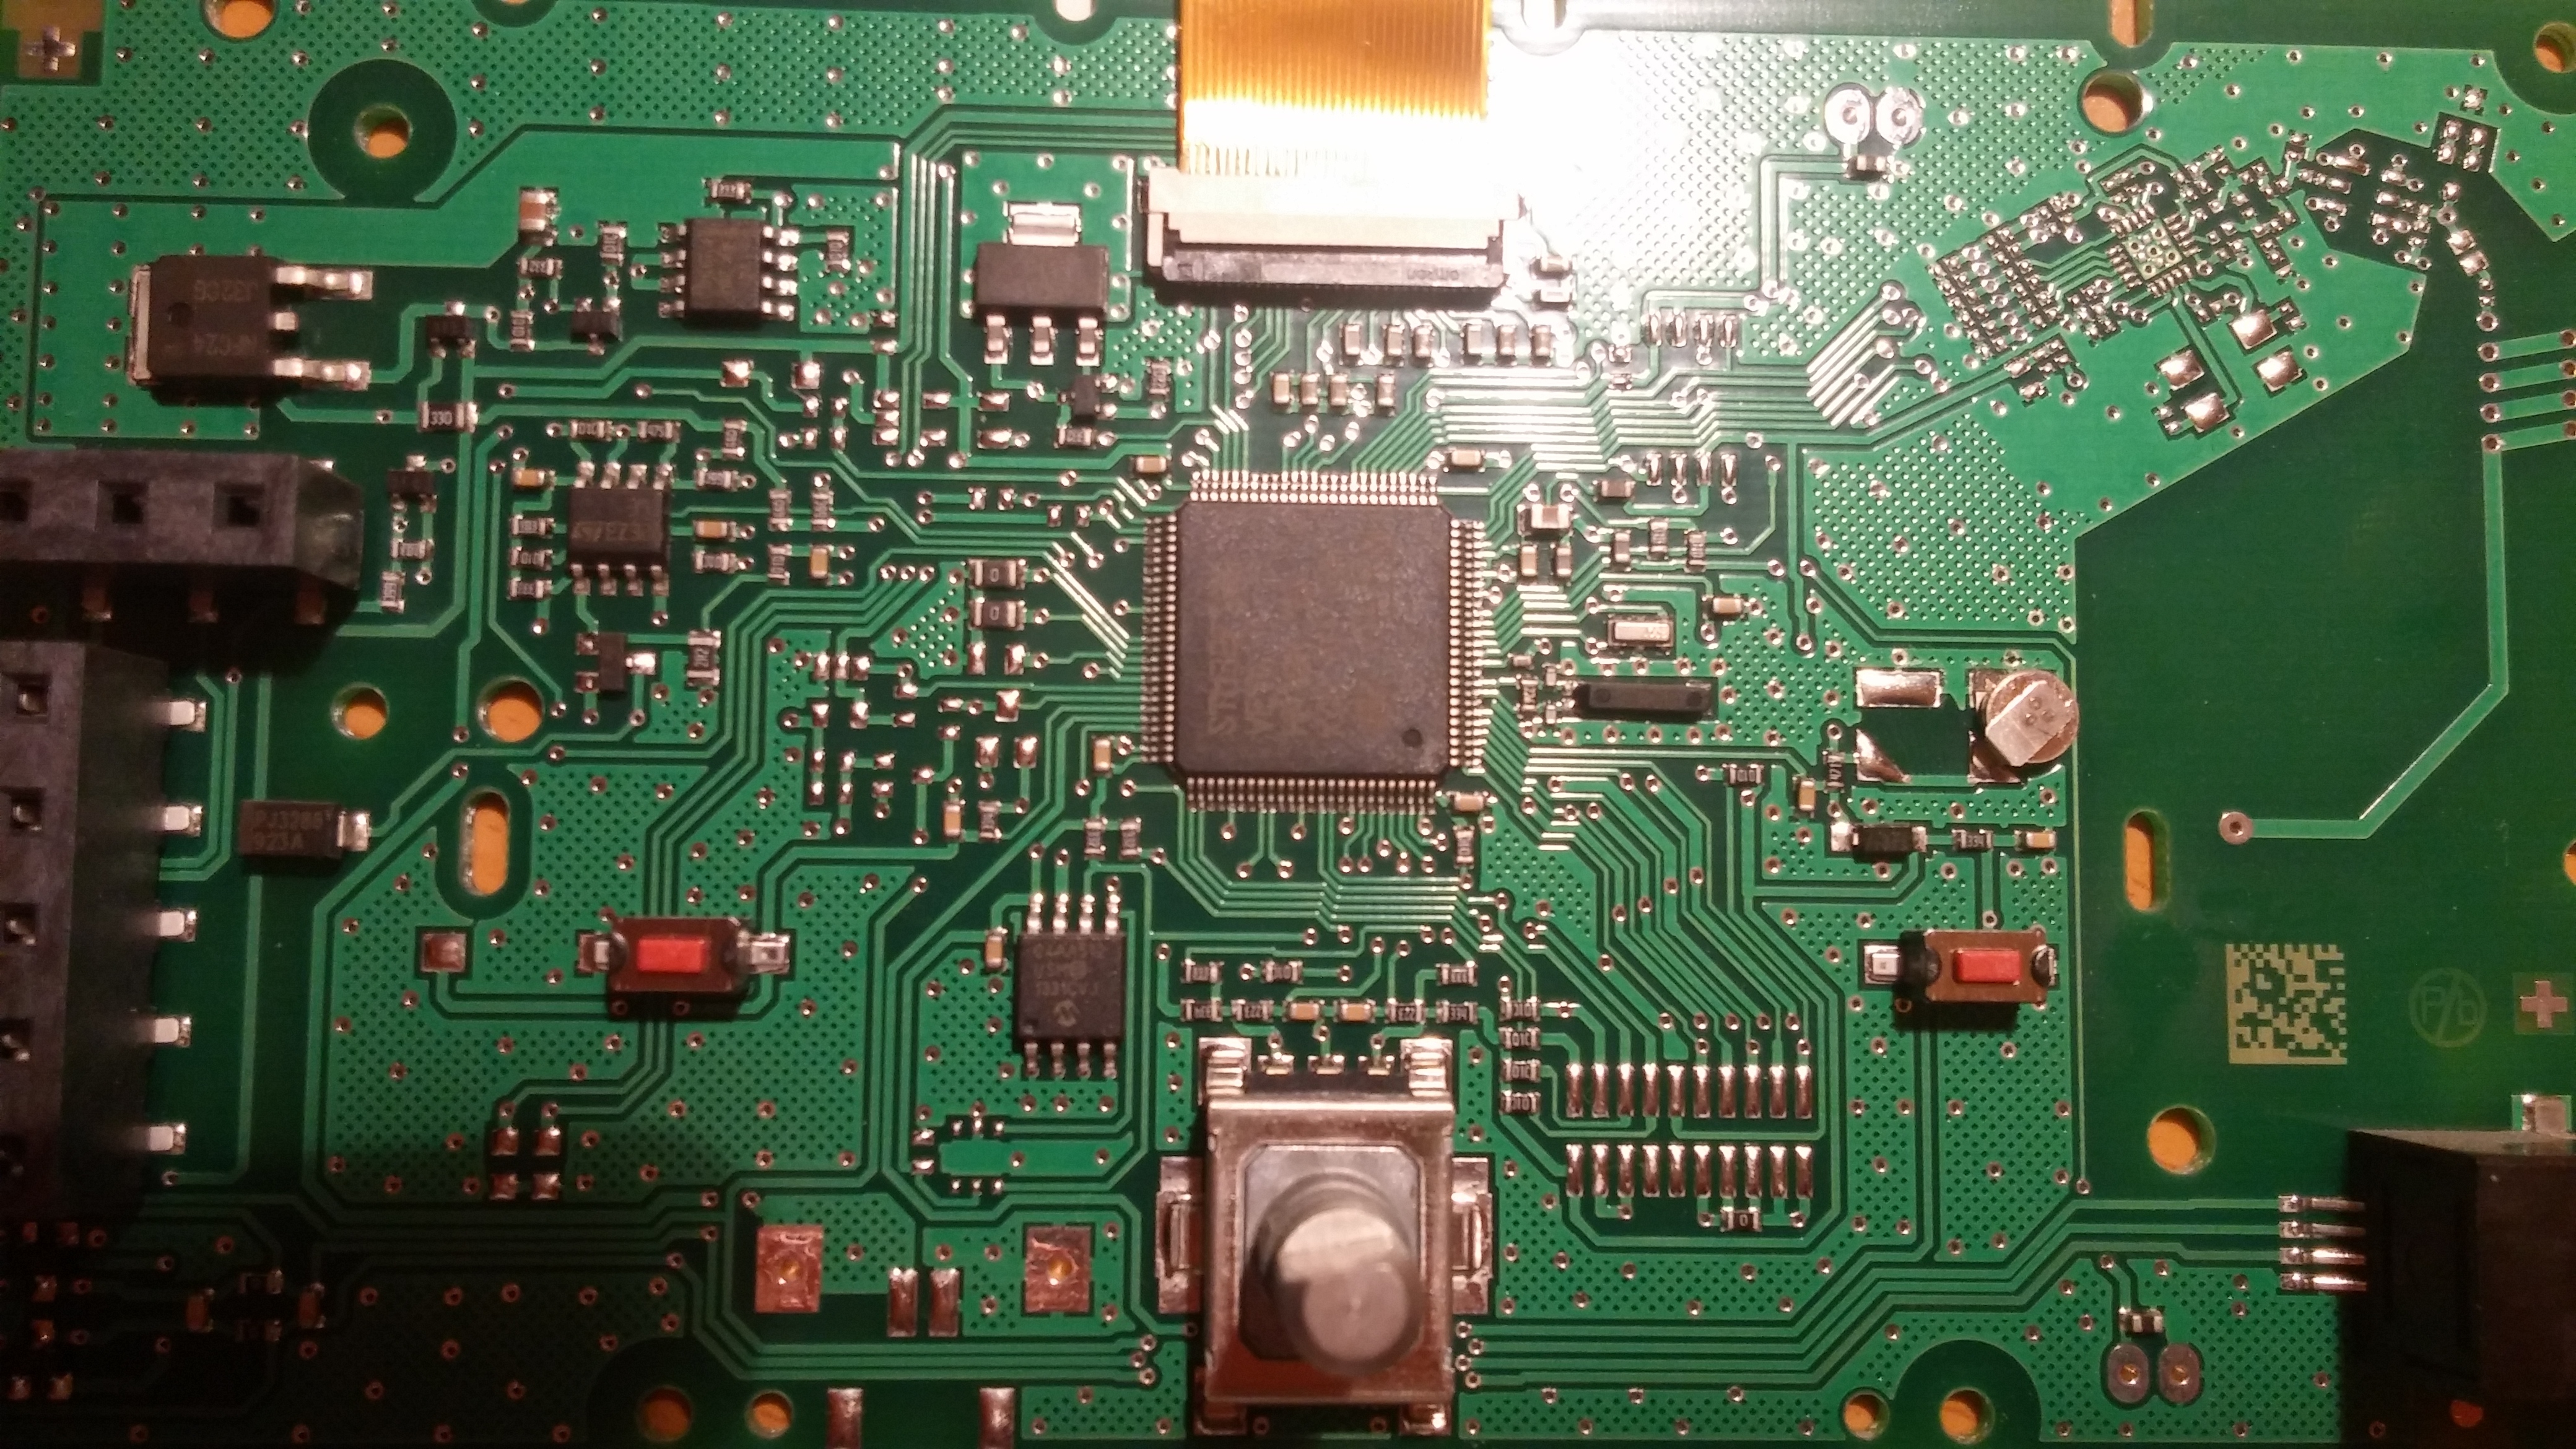 [Solved] Vaillant Calormatic 470 - Clock backup, battery replacement?